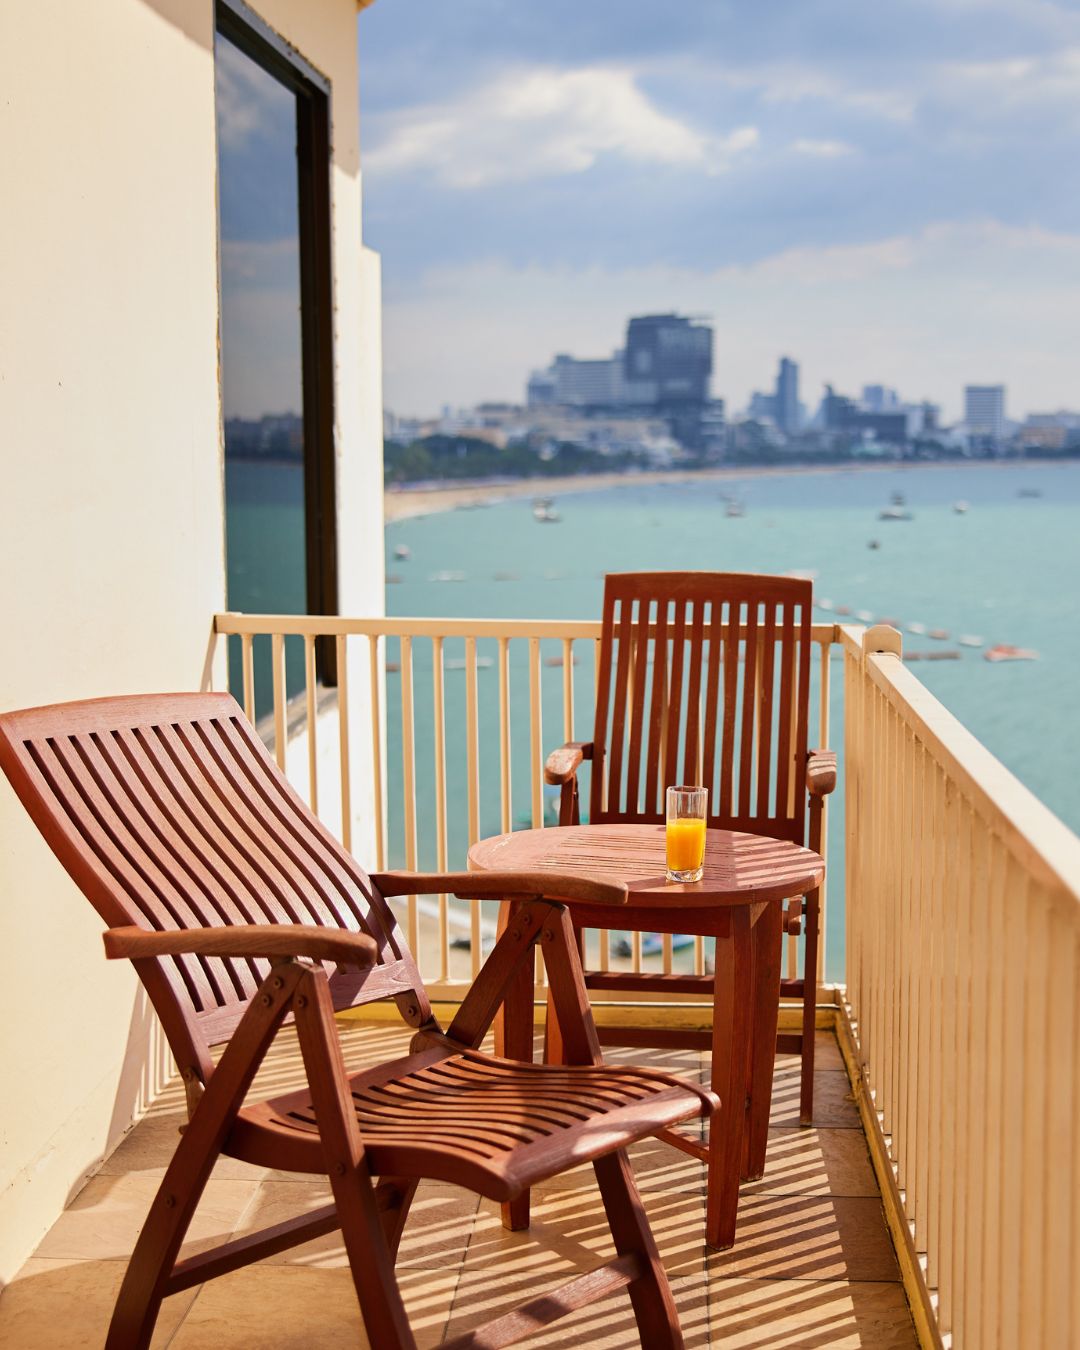 Dusit Thani Pattaya_Saver Offer Room with Breakfast_1080x1350